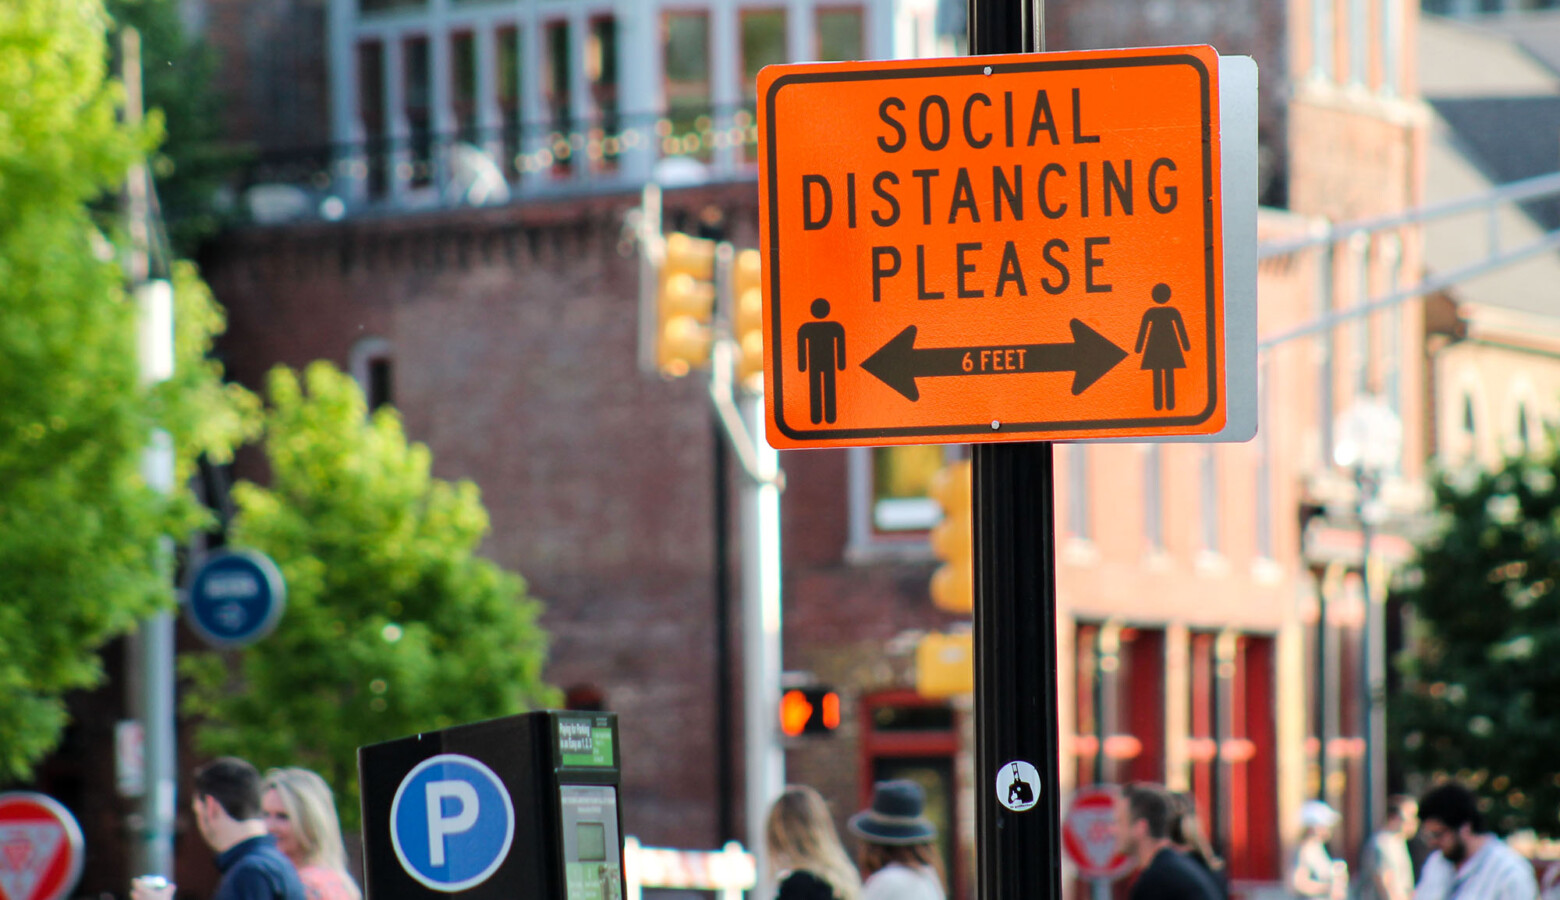 Downtown Indianapolis blocked parts of Mass Ave. to allow outdoor seating. The city also installed signs, reminding people to social distance while visiting businesses and restaurants. (Lauren Chapman/IPB News)